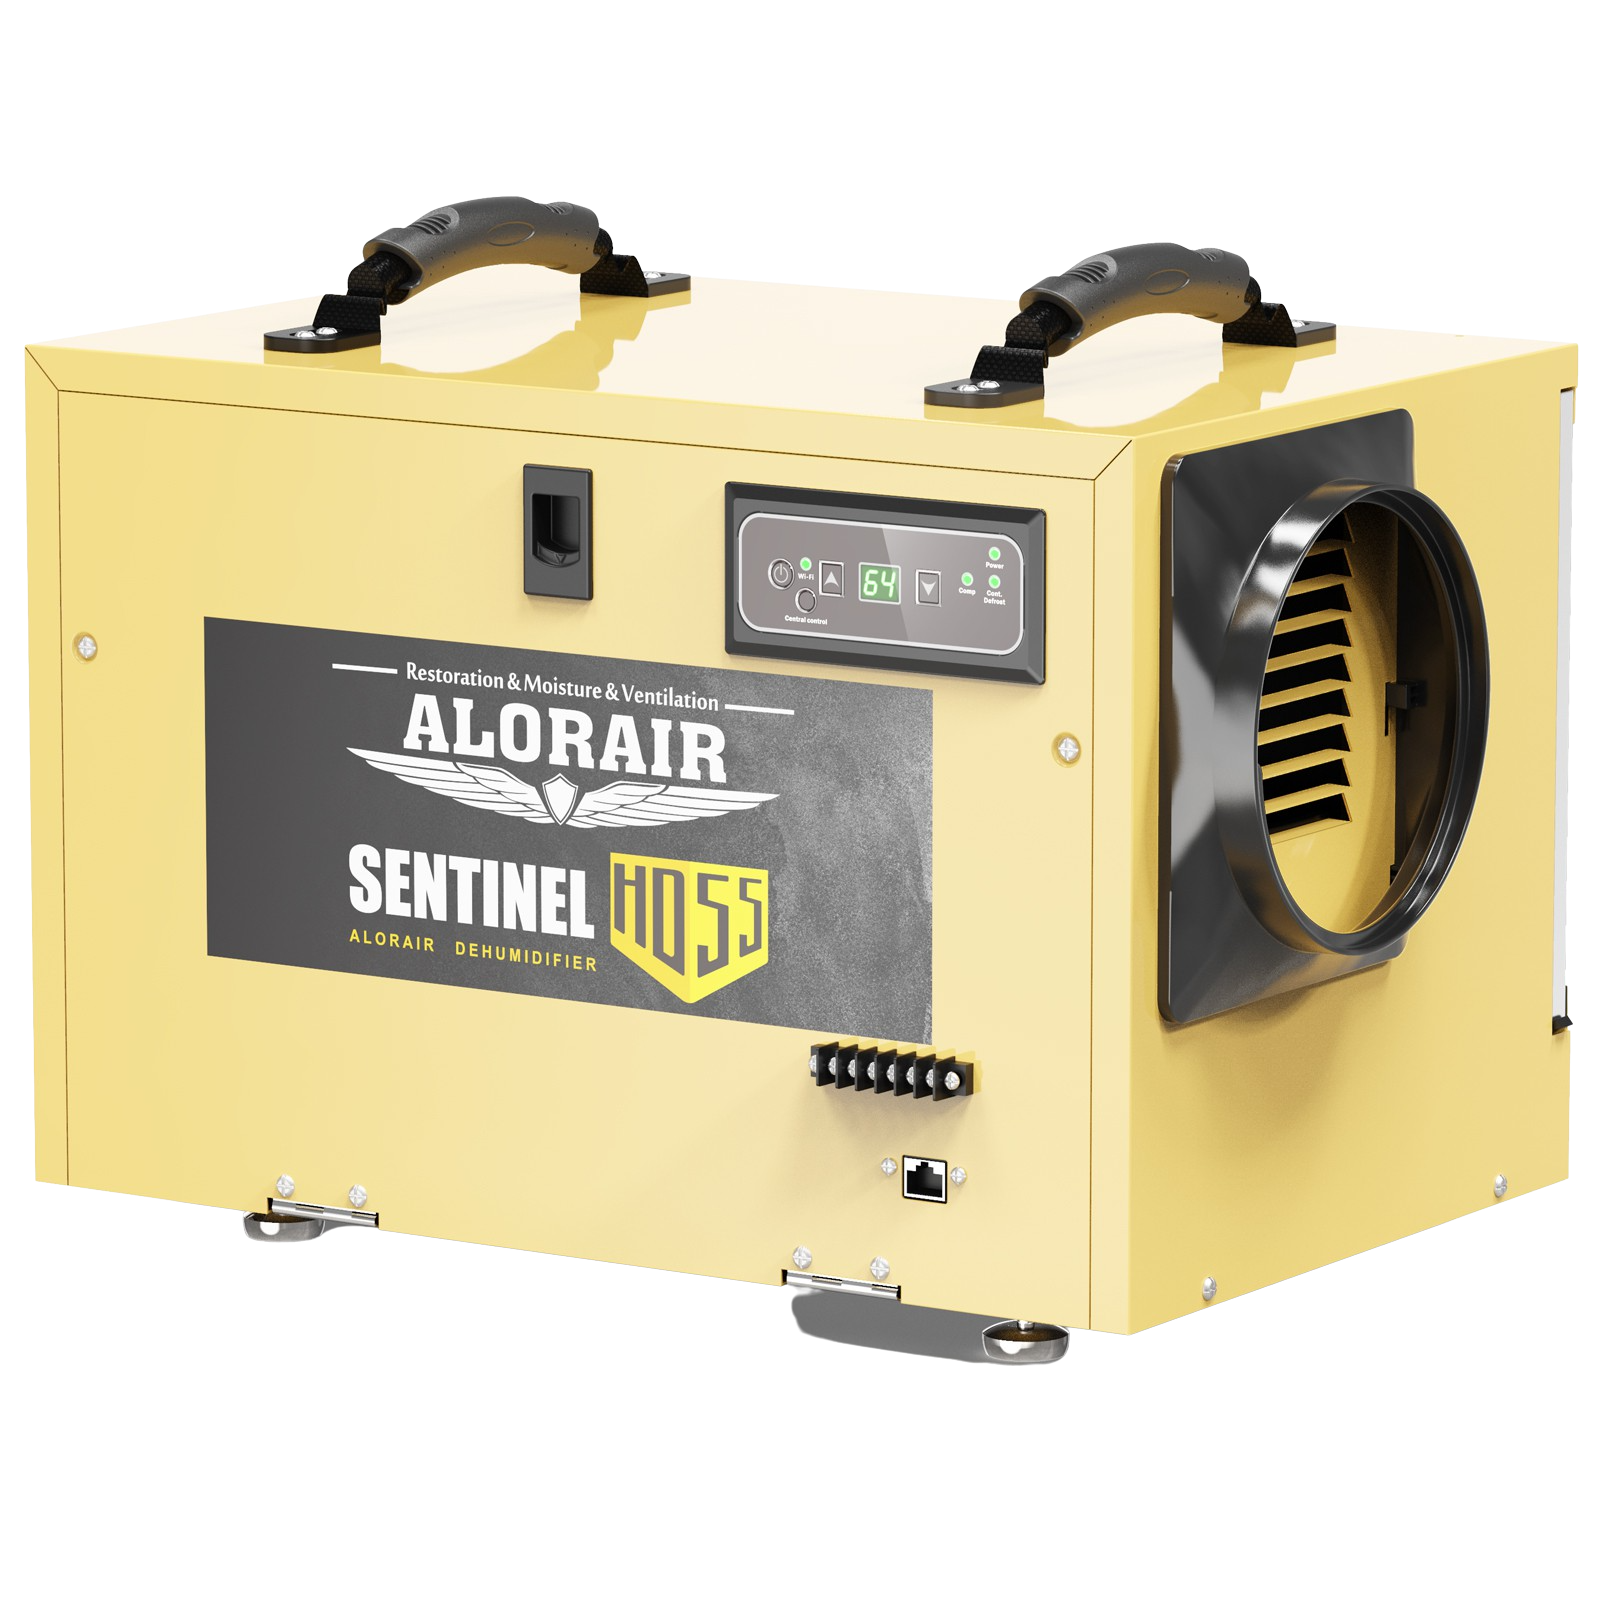 AlorAir, AlorAir Sentinel HD55 Gold Basement/Crawlspace Commercial Dehumidifier Removal 120 PPD with Drain Hose, Auto Defrost, And Memory Restart New